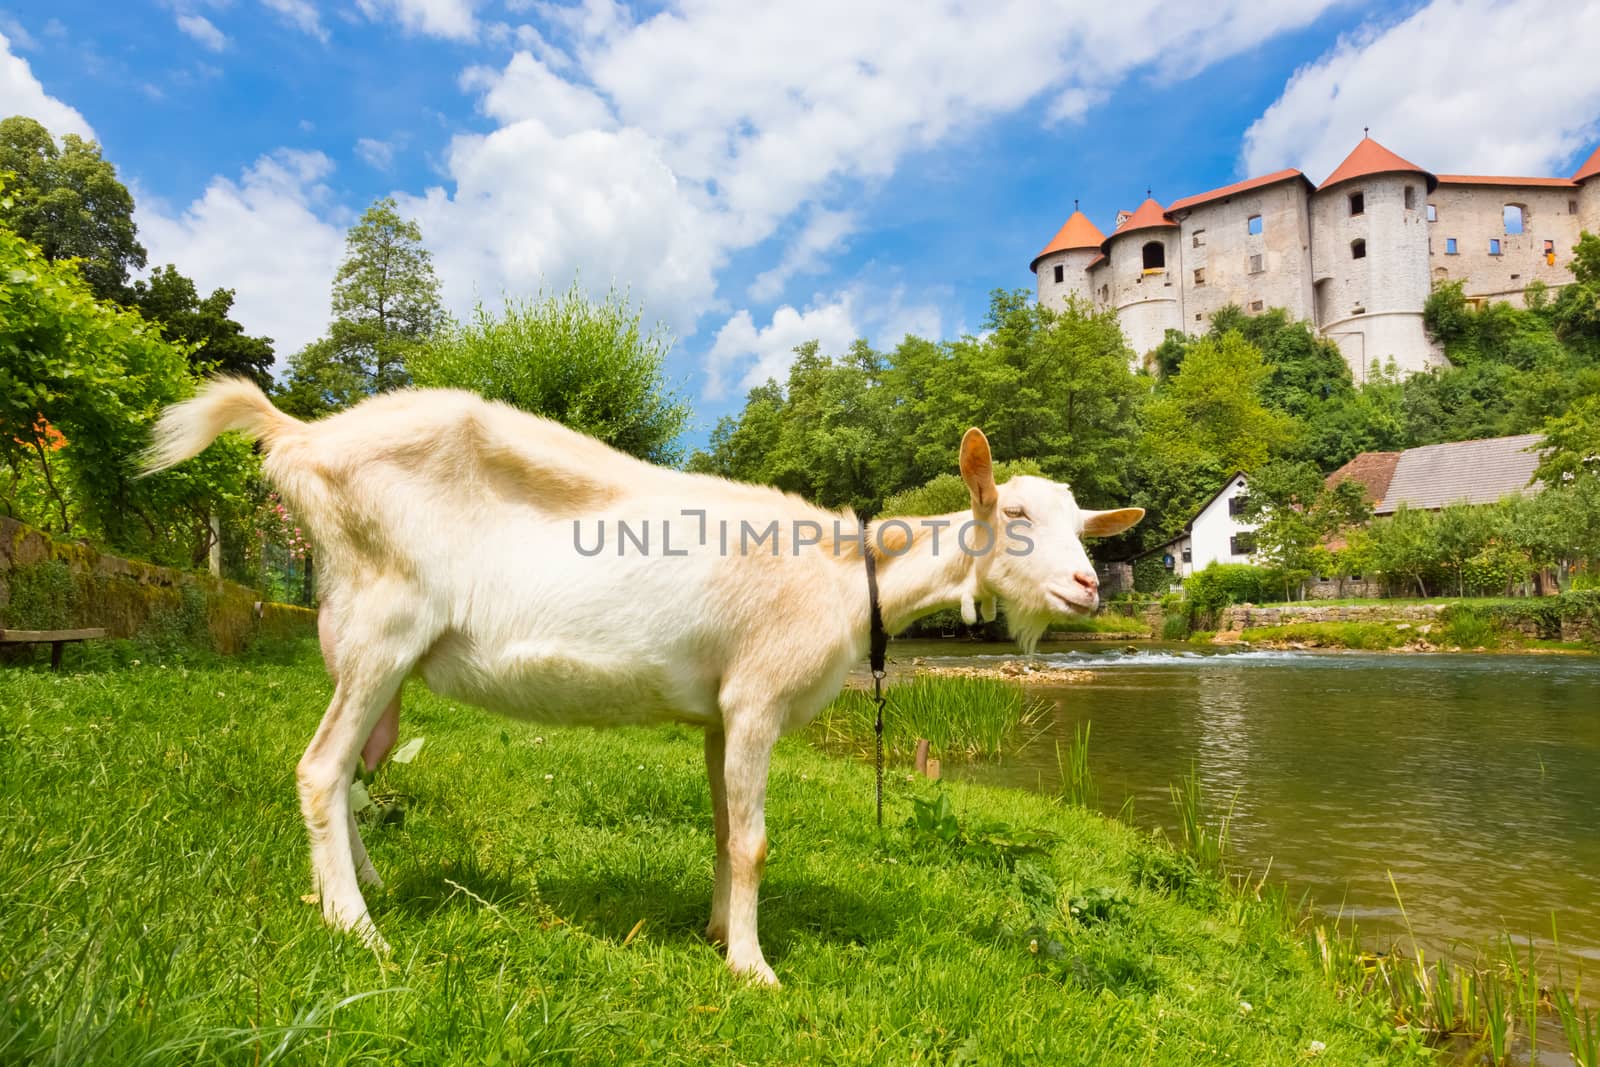 Domestic goat in front of Zuzemberk castle, tourist destination in Slovenia. Zuzemberk is also a town in the Dinaric Alps of Slovenia located south east of the Slovenian capital of Ljubljana.